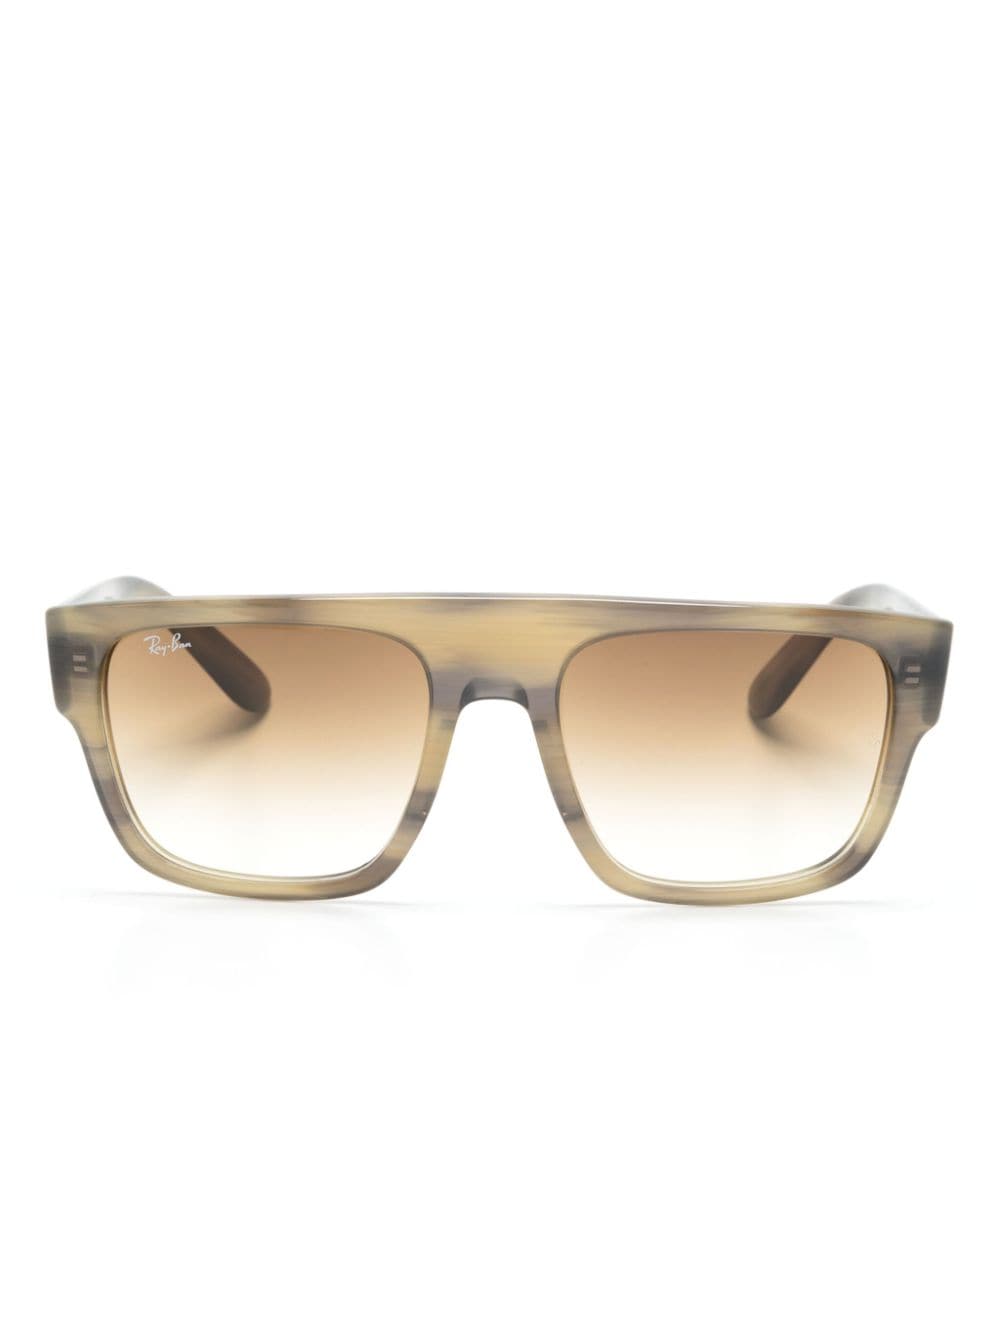 Ray Ban Drifter Square-frame Sunglasses In Neutral